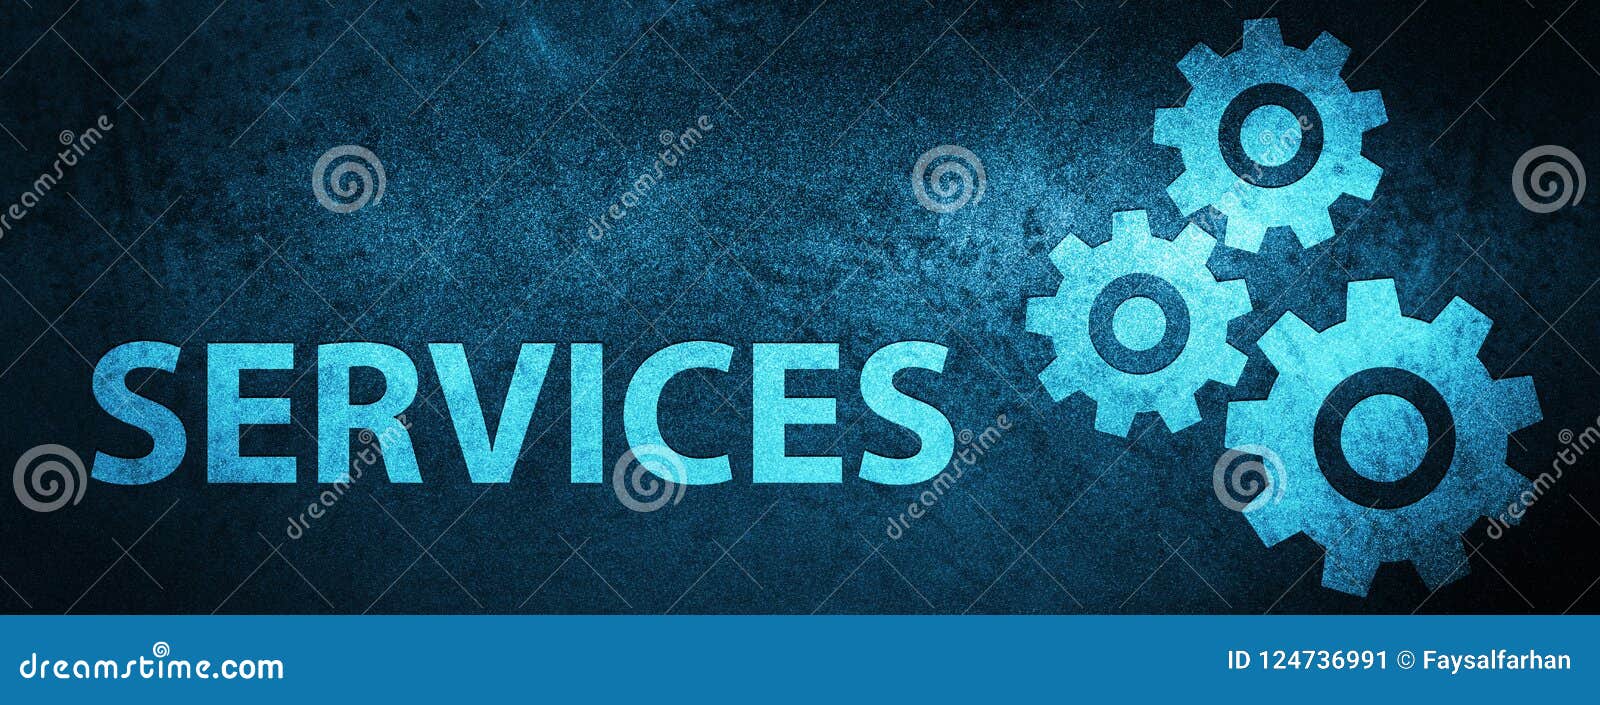 Services (gears Icon) Special Blue Banner Background Stock Illustration -  Illustration of banner, services: 124736991